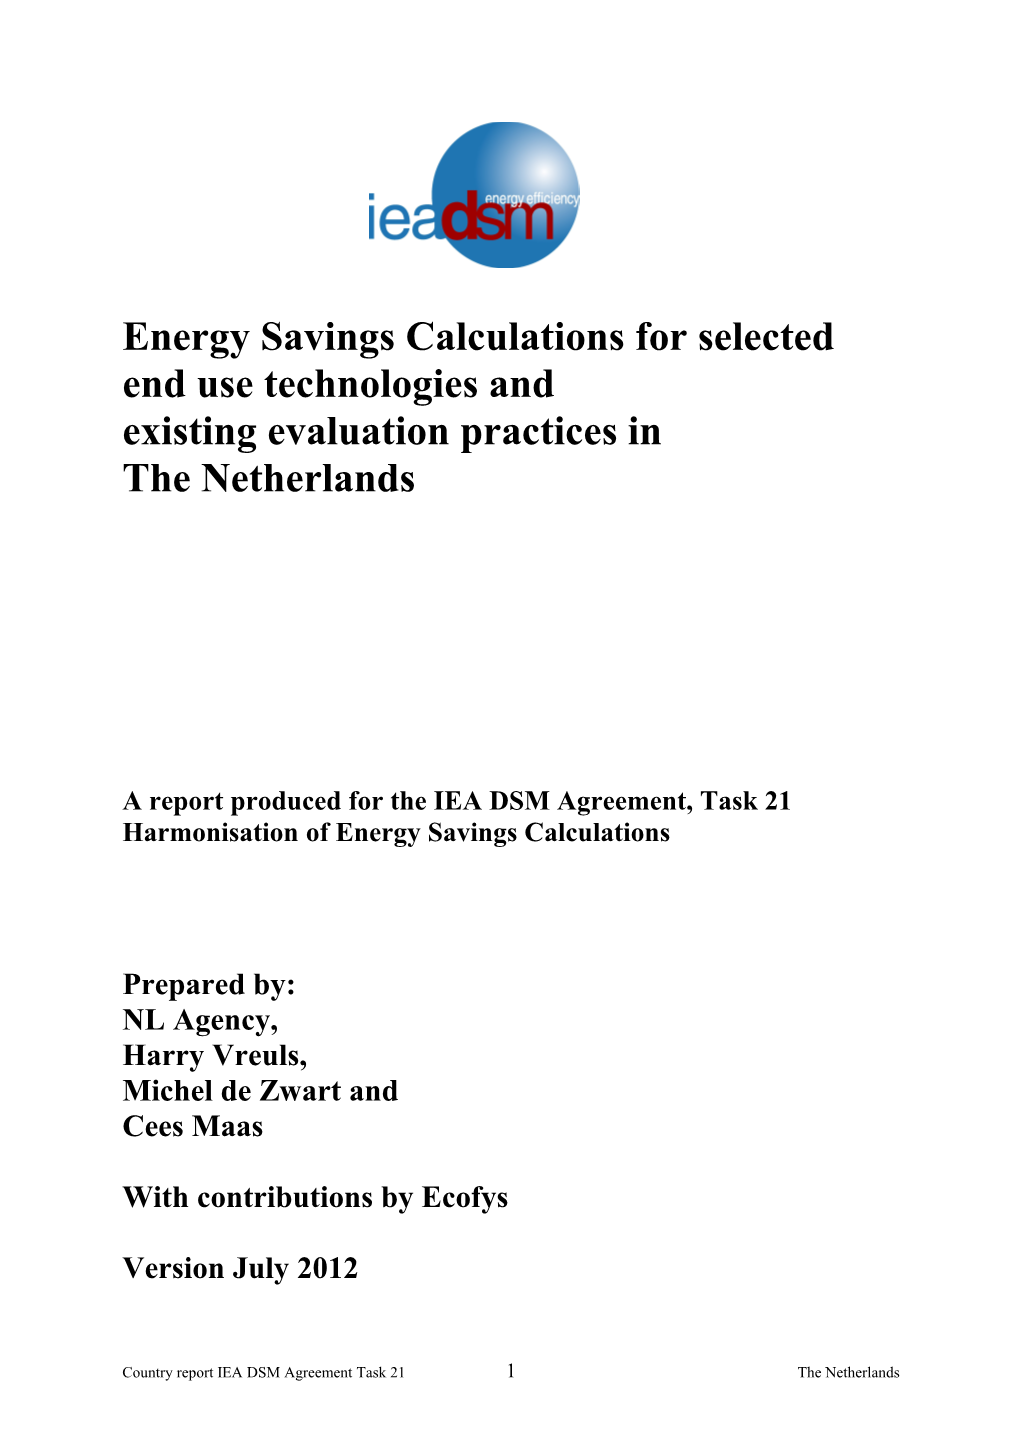 Energy Savings Calculations for Selected End Use Technologies And